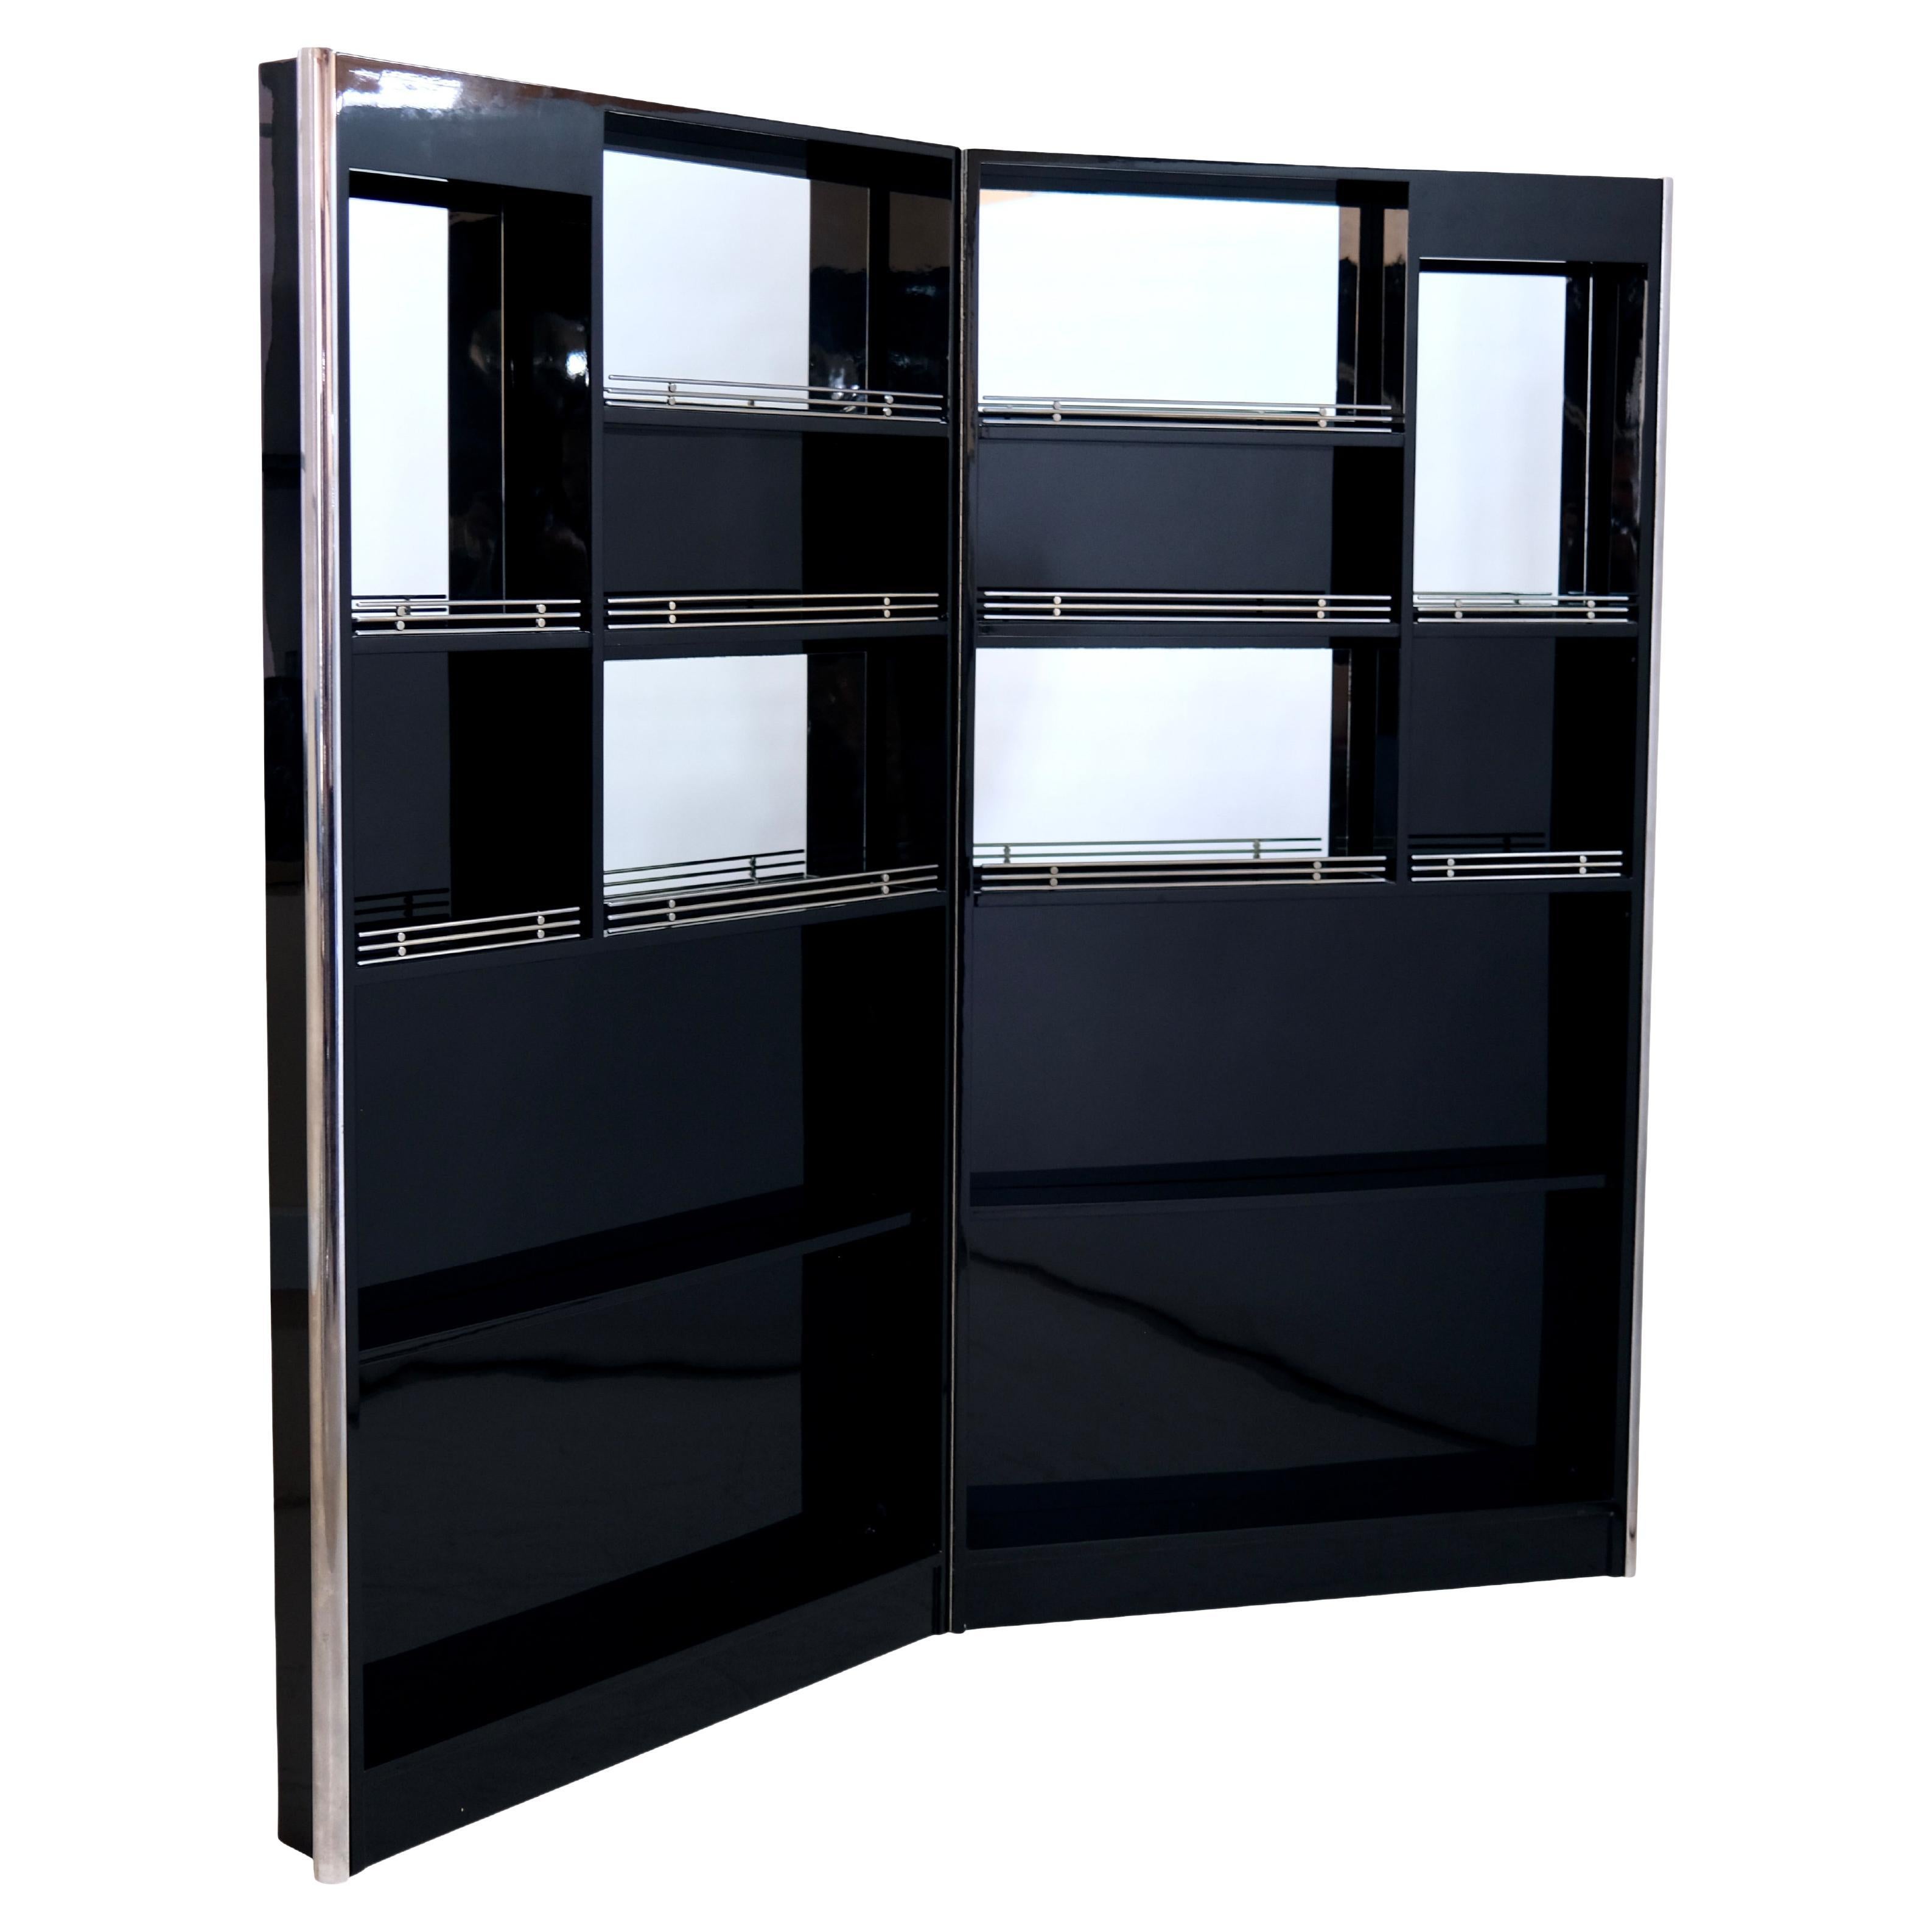 Two-Winged 1930s French Art Deco Bar Back Wall in Black Lacquer with Chrome